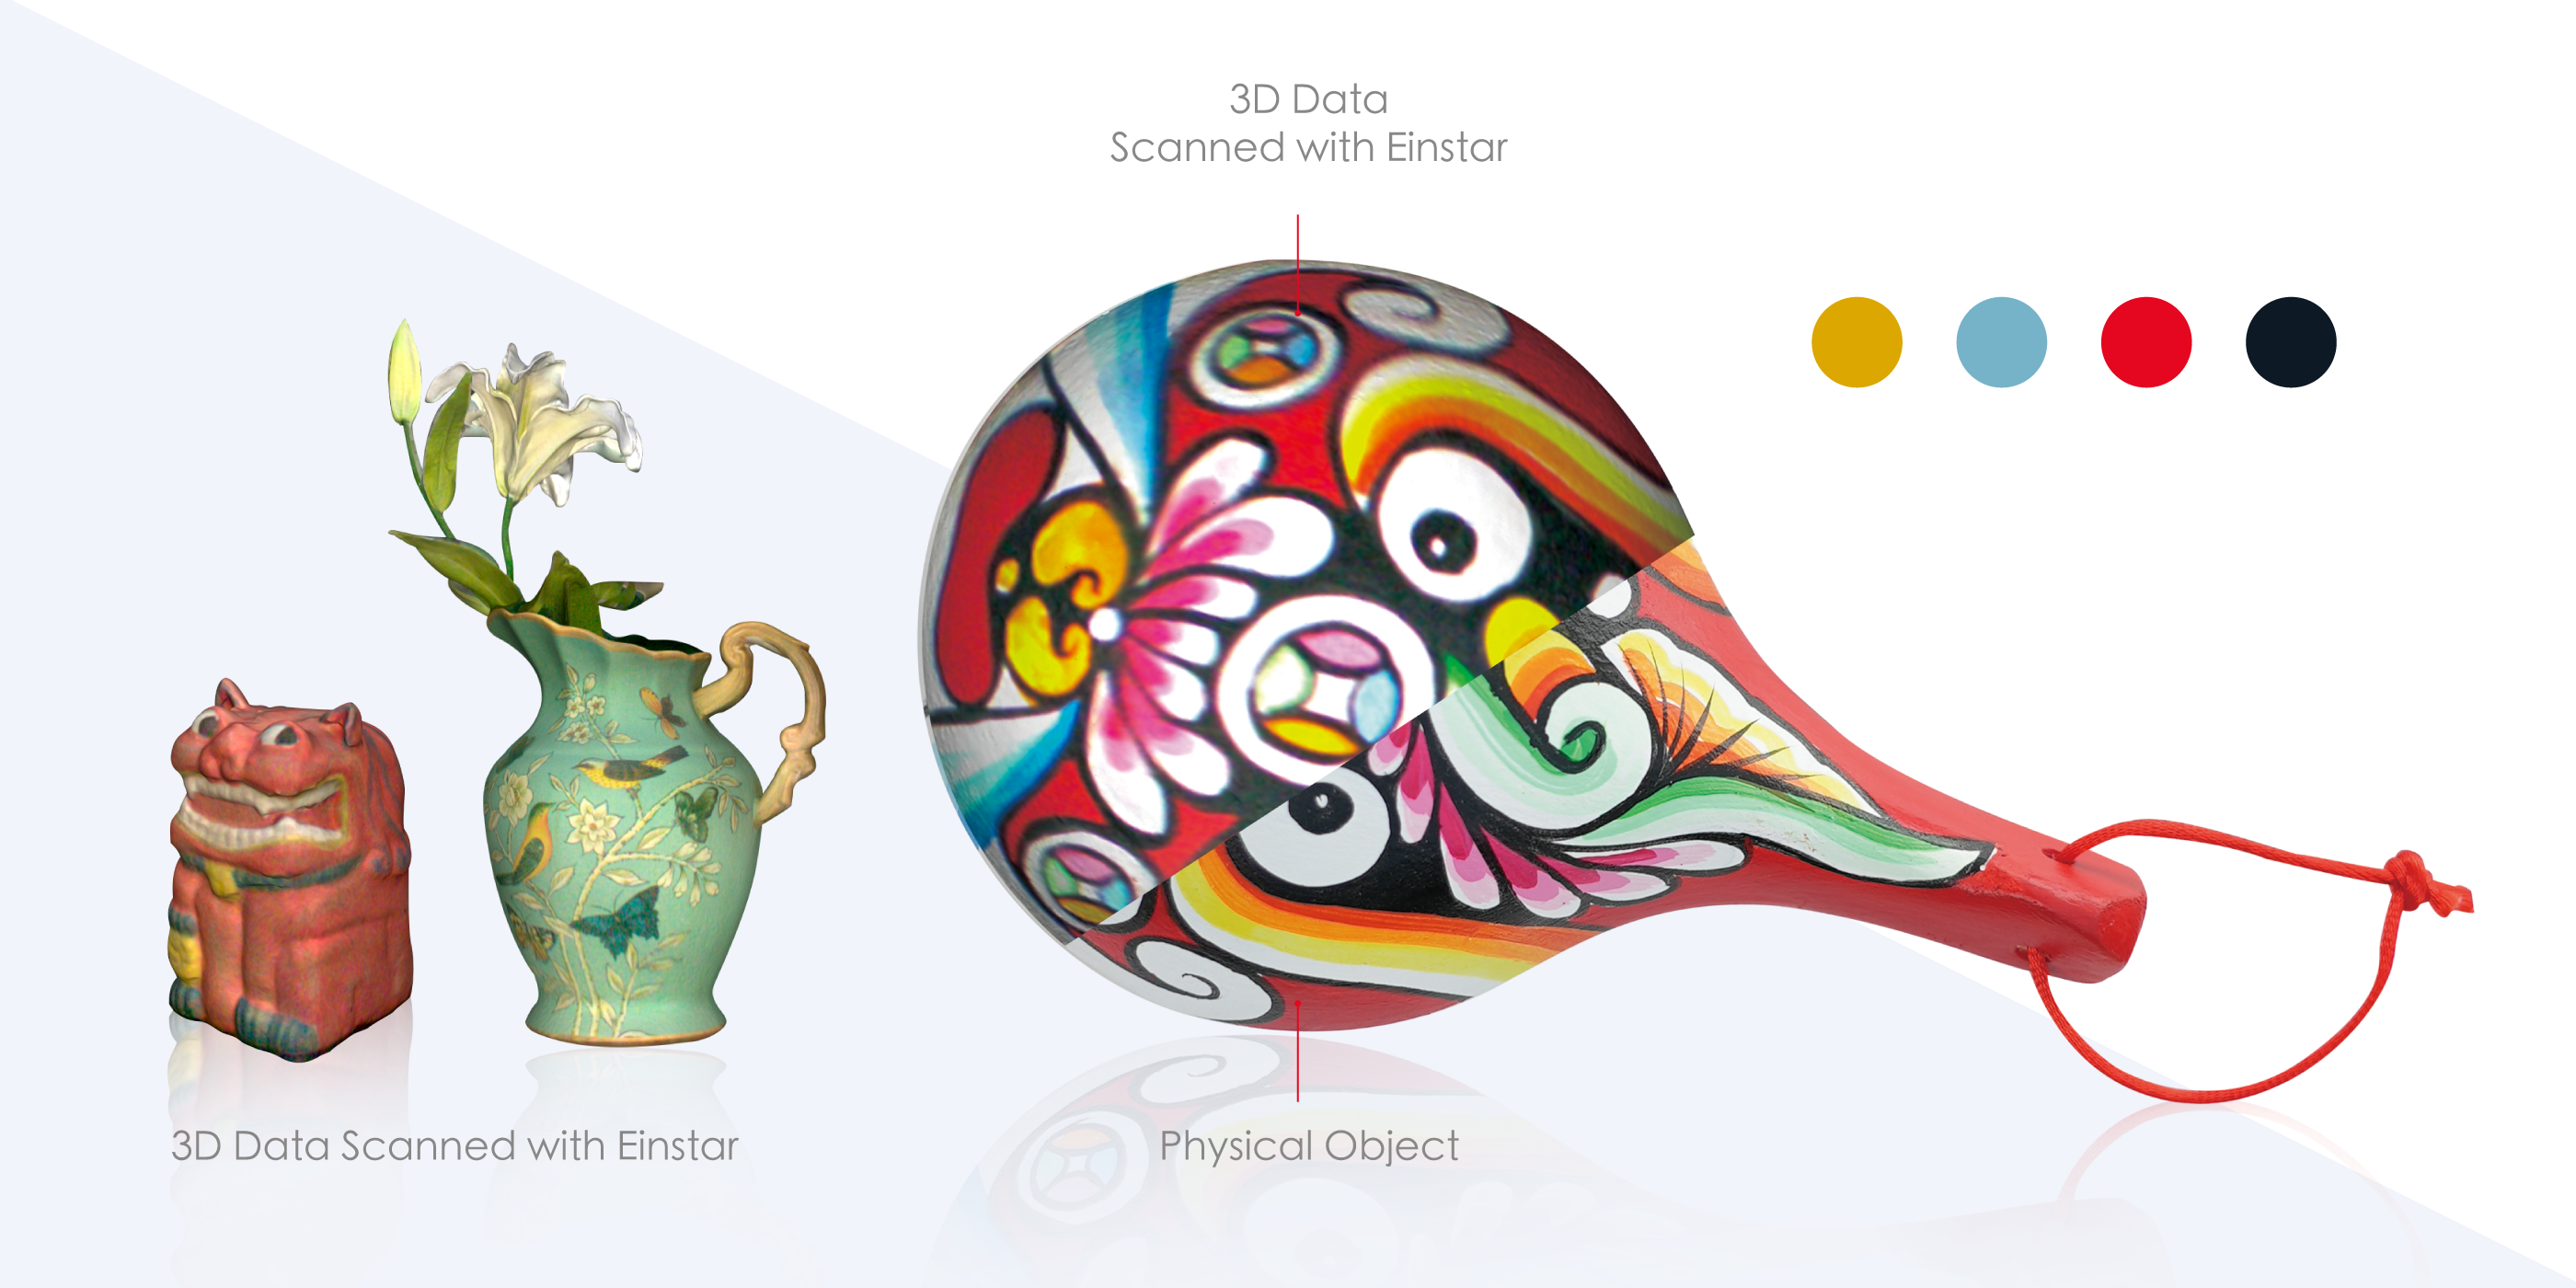 High Color Fidelity: 3D data with authentic colors using EINSTAR 3D scanner's built-in RGB color camera.